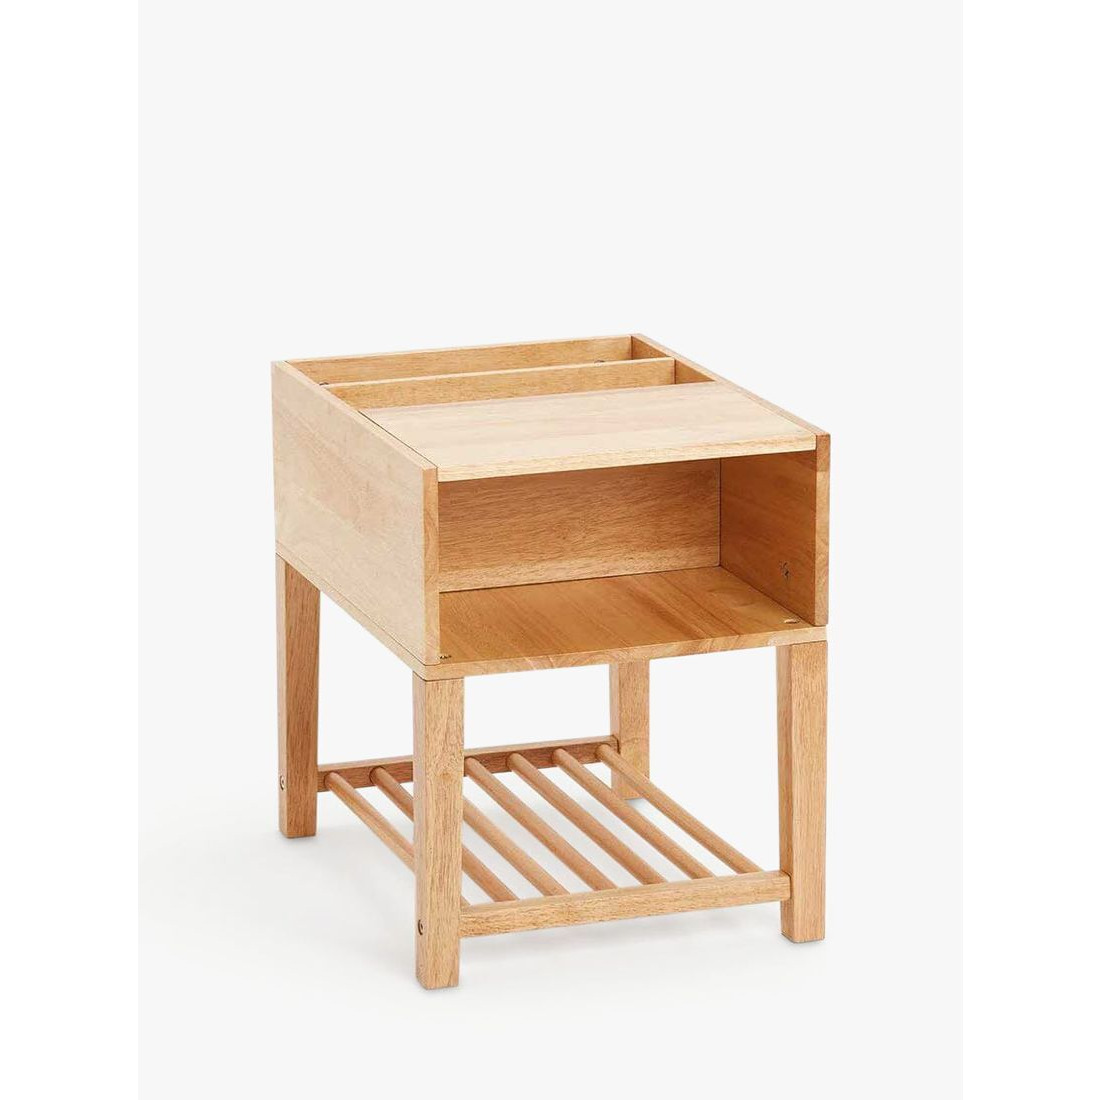 Great Little Trading Co Croft Storage Bedside Table, Natural - image 1